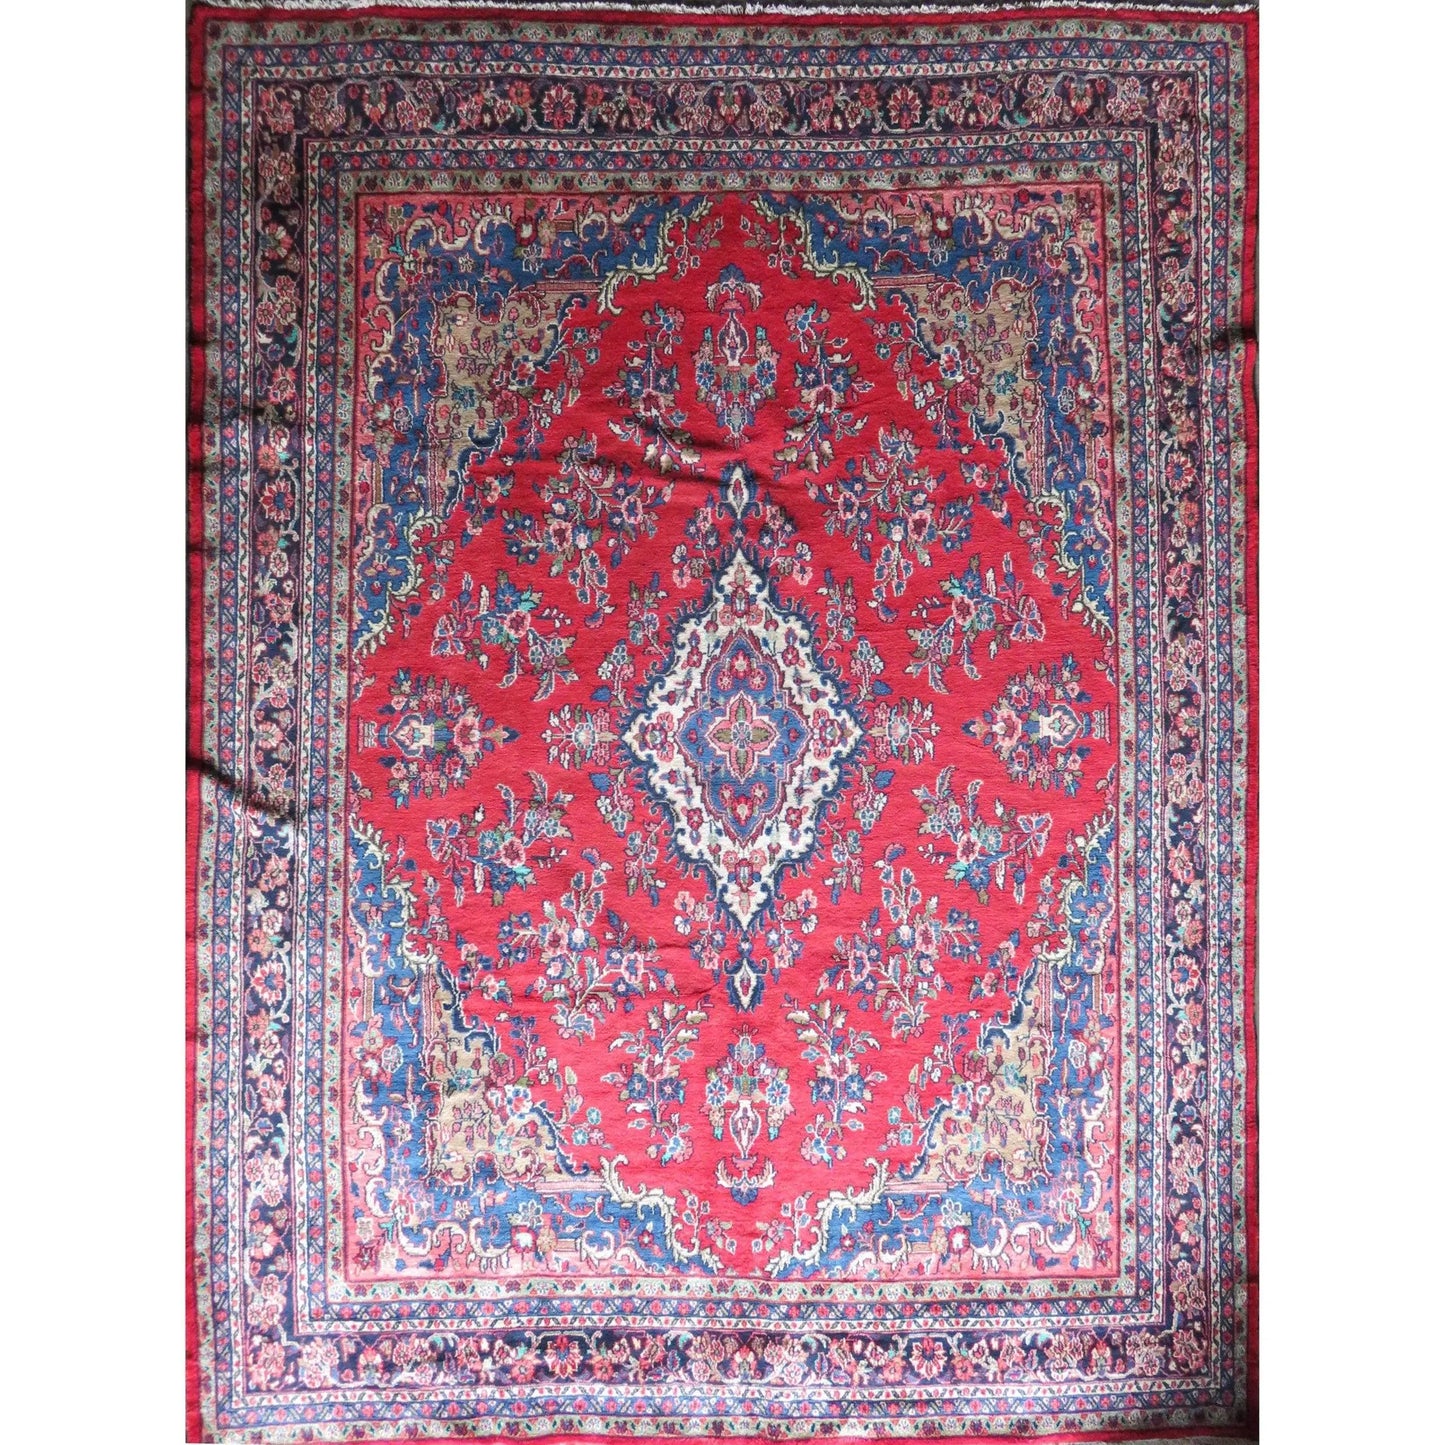 Hand-Knotted Persian Wool Rug _ Luxurious Vintage Design, 13'10" x 9'8", Artisan Crafted